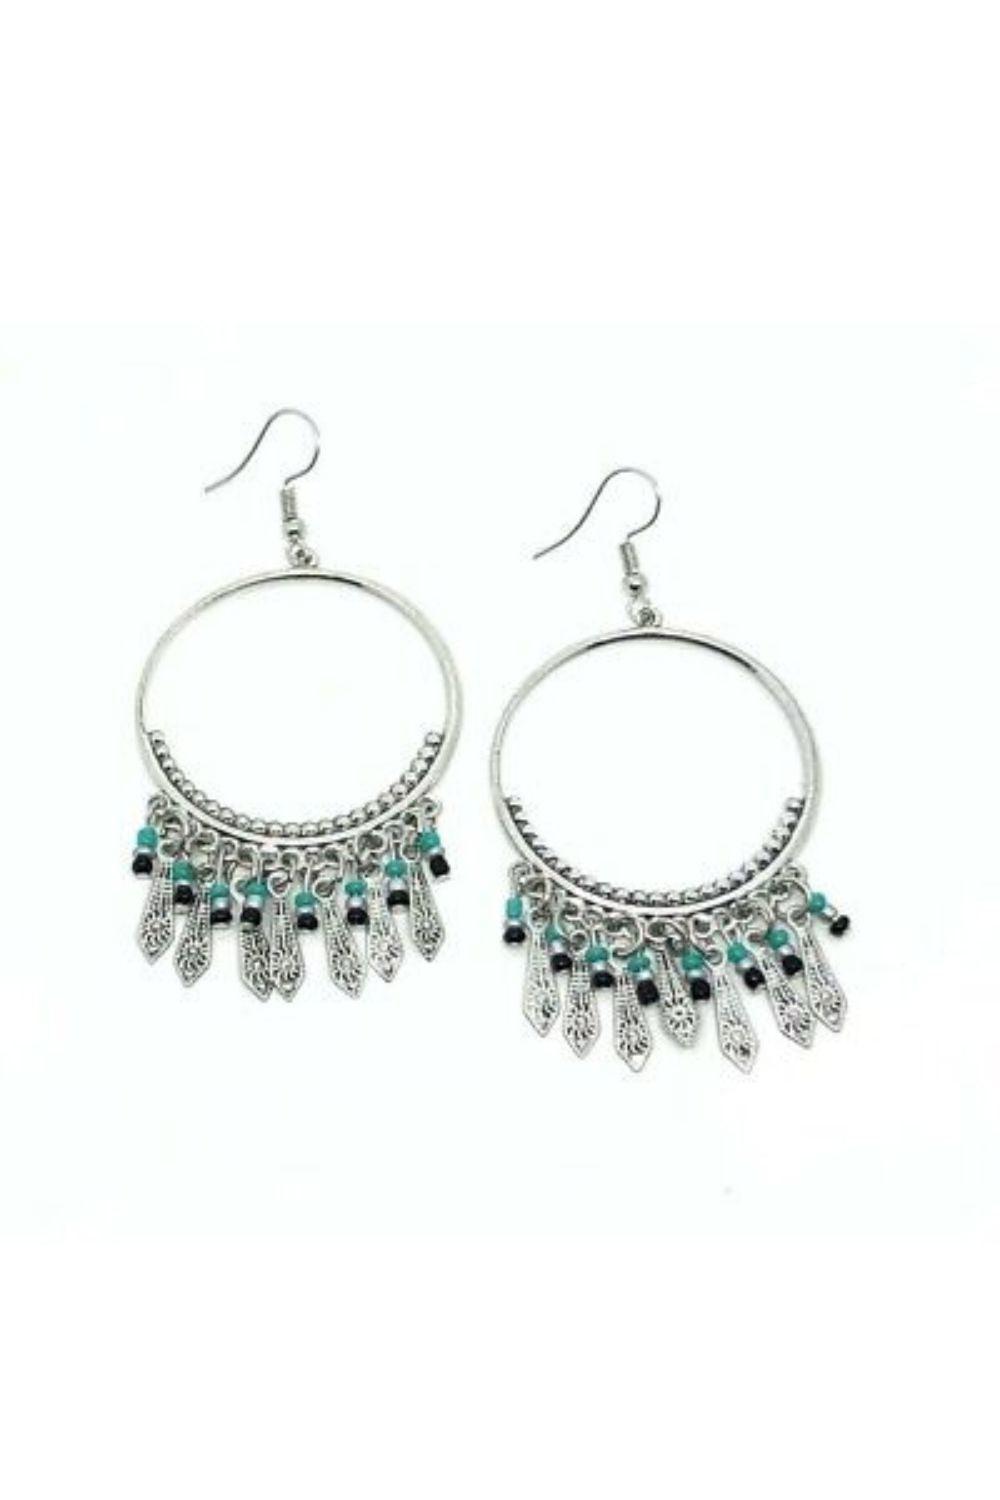 Floral Serenity Silver and Blue Earrings - Paparazzi Accessories- lightbox - CarasShop.com - $5 Jewelry by Cara Jewels